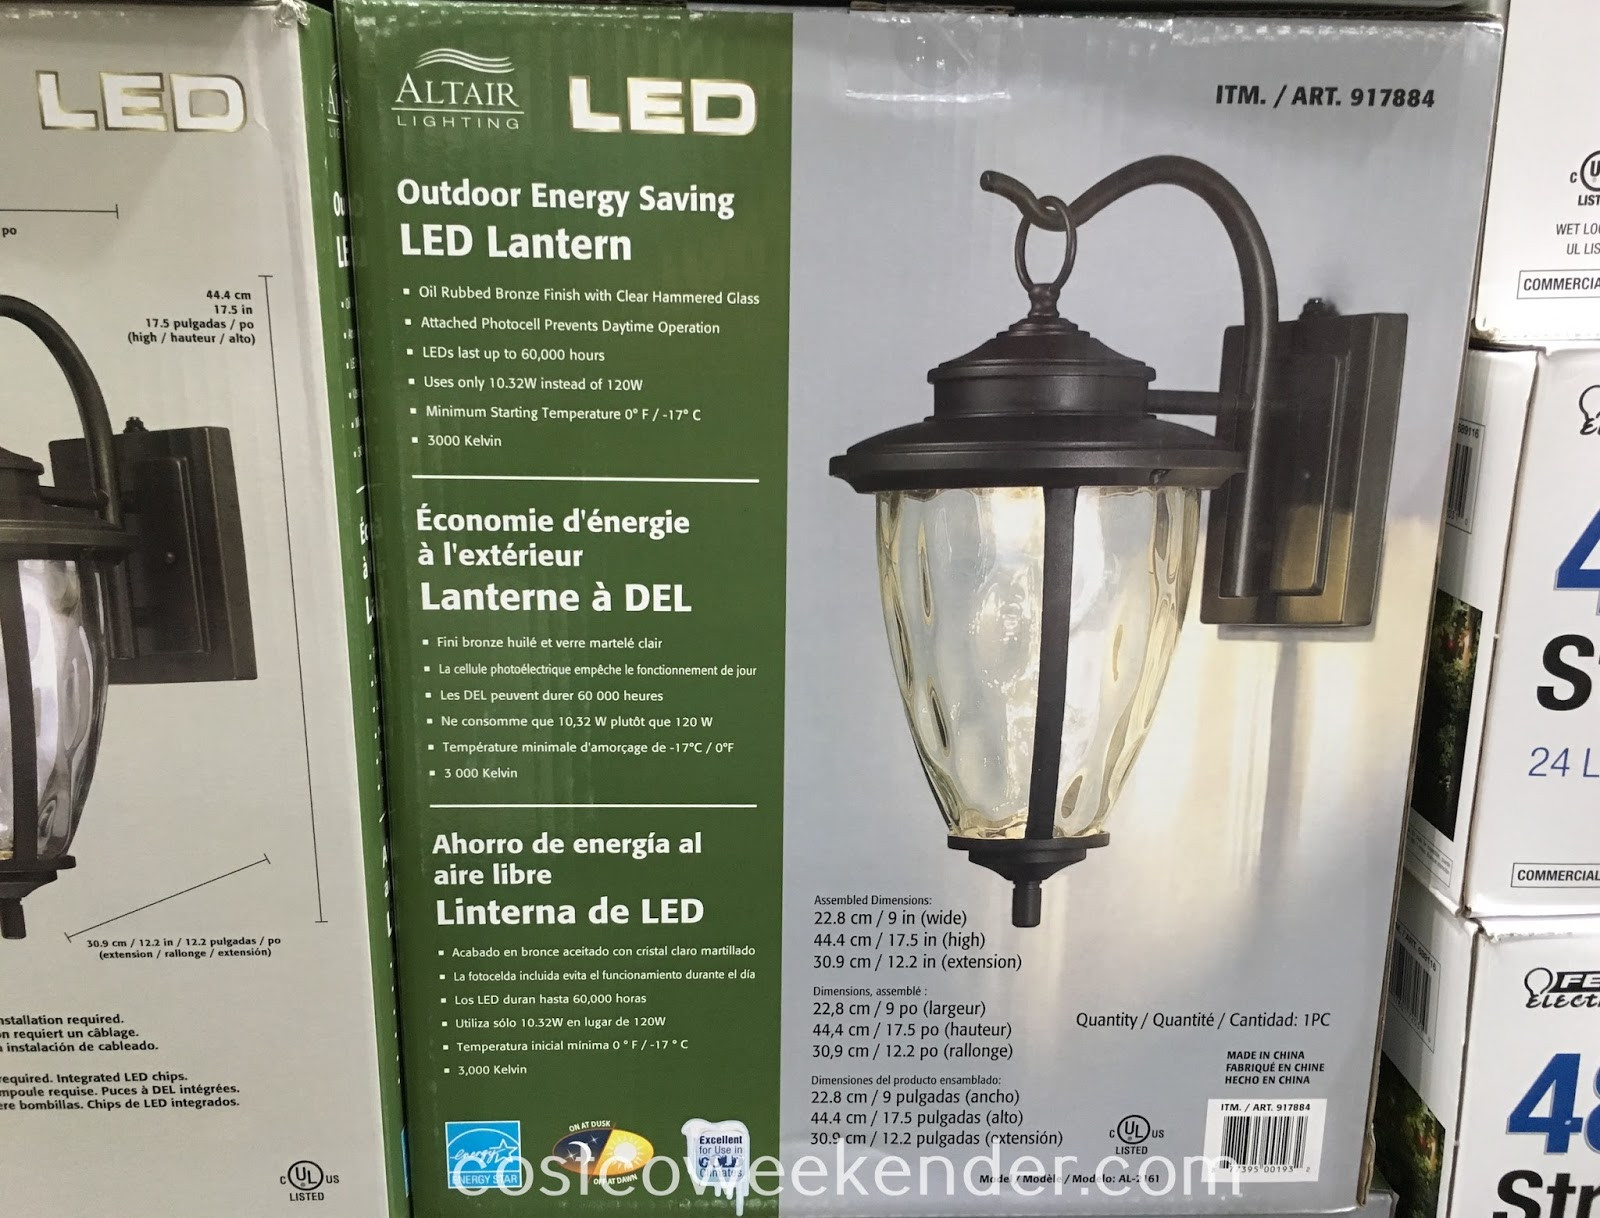 Best ideas about Altair Led Outdoor Coach Light
. Save or Pin Altair Outdoor LED Coach Lantern Now.